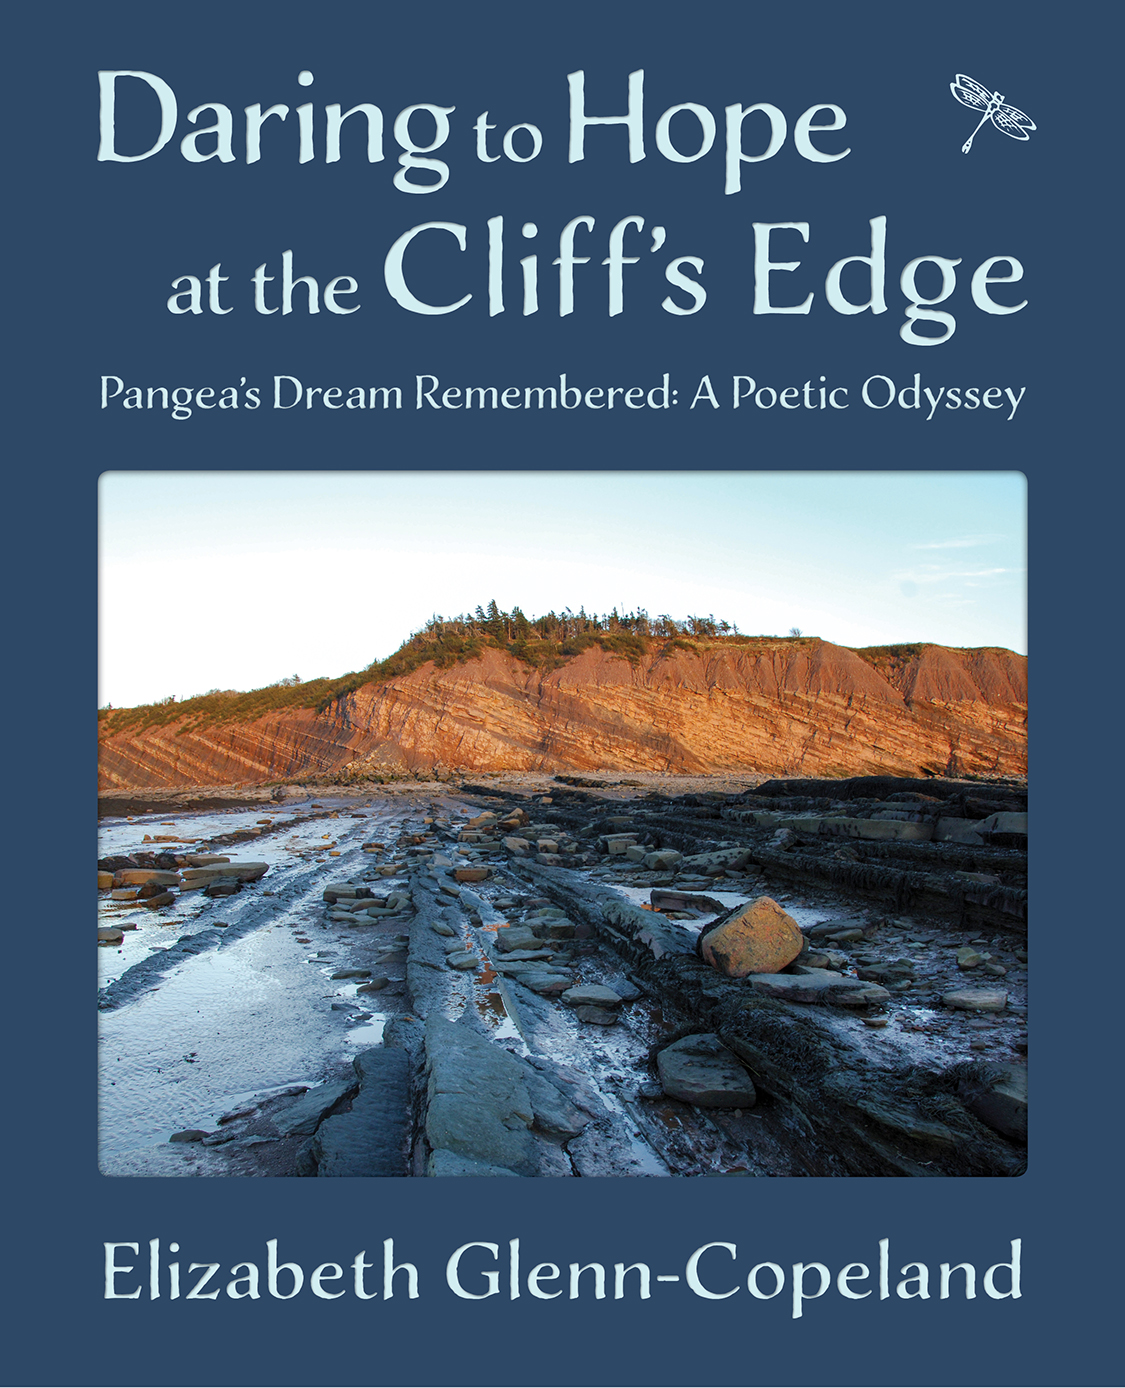 Daring to Hope at the Cliff's Edge